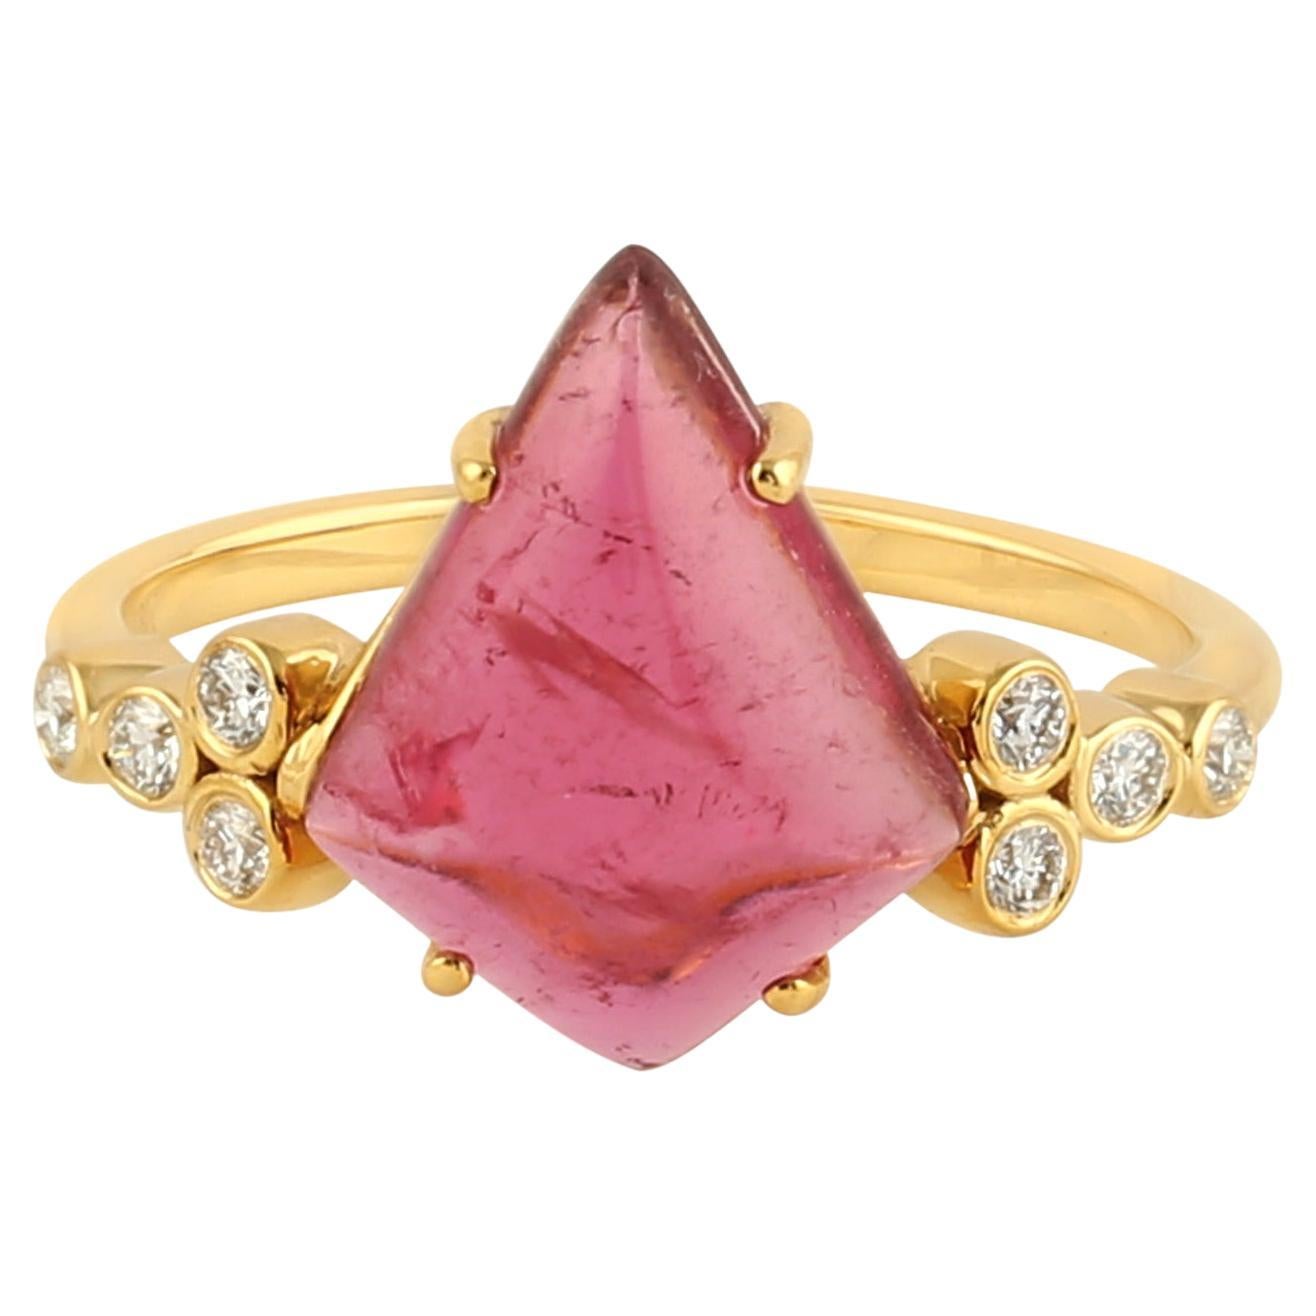 Tourmaline Ring With Diamonds Made In 18k Yellow Gold